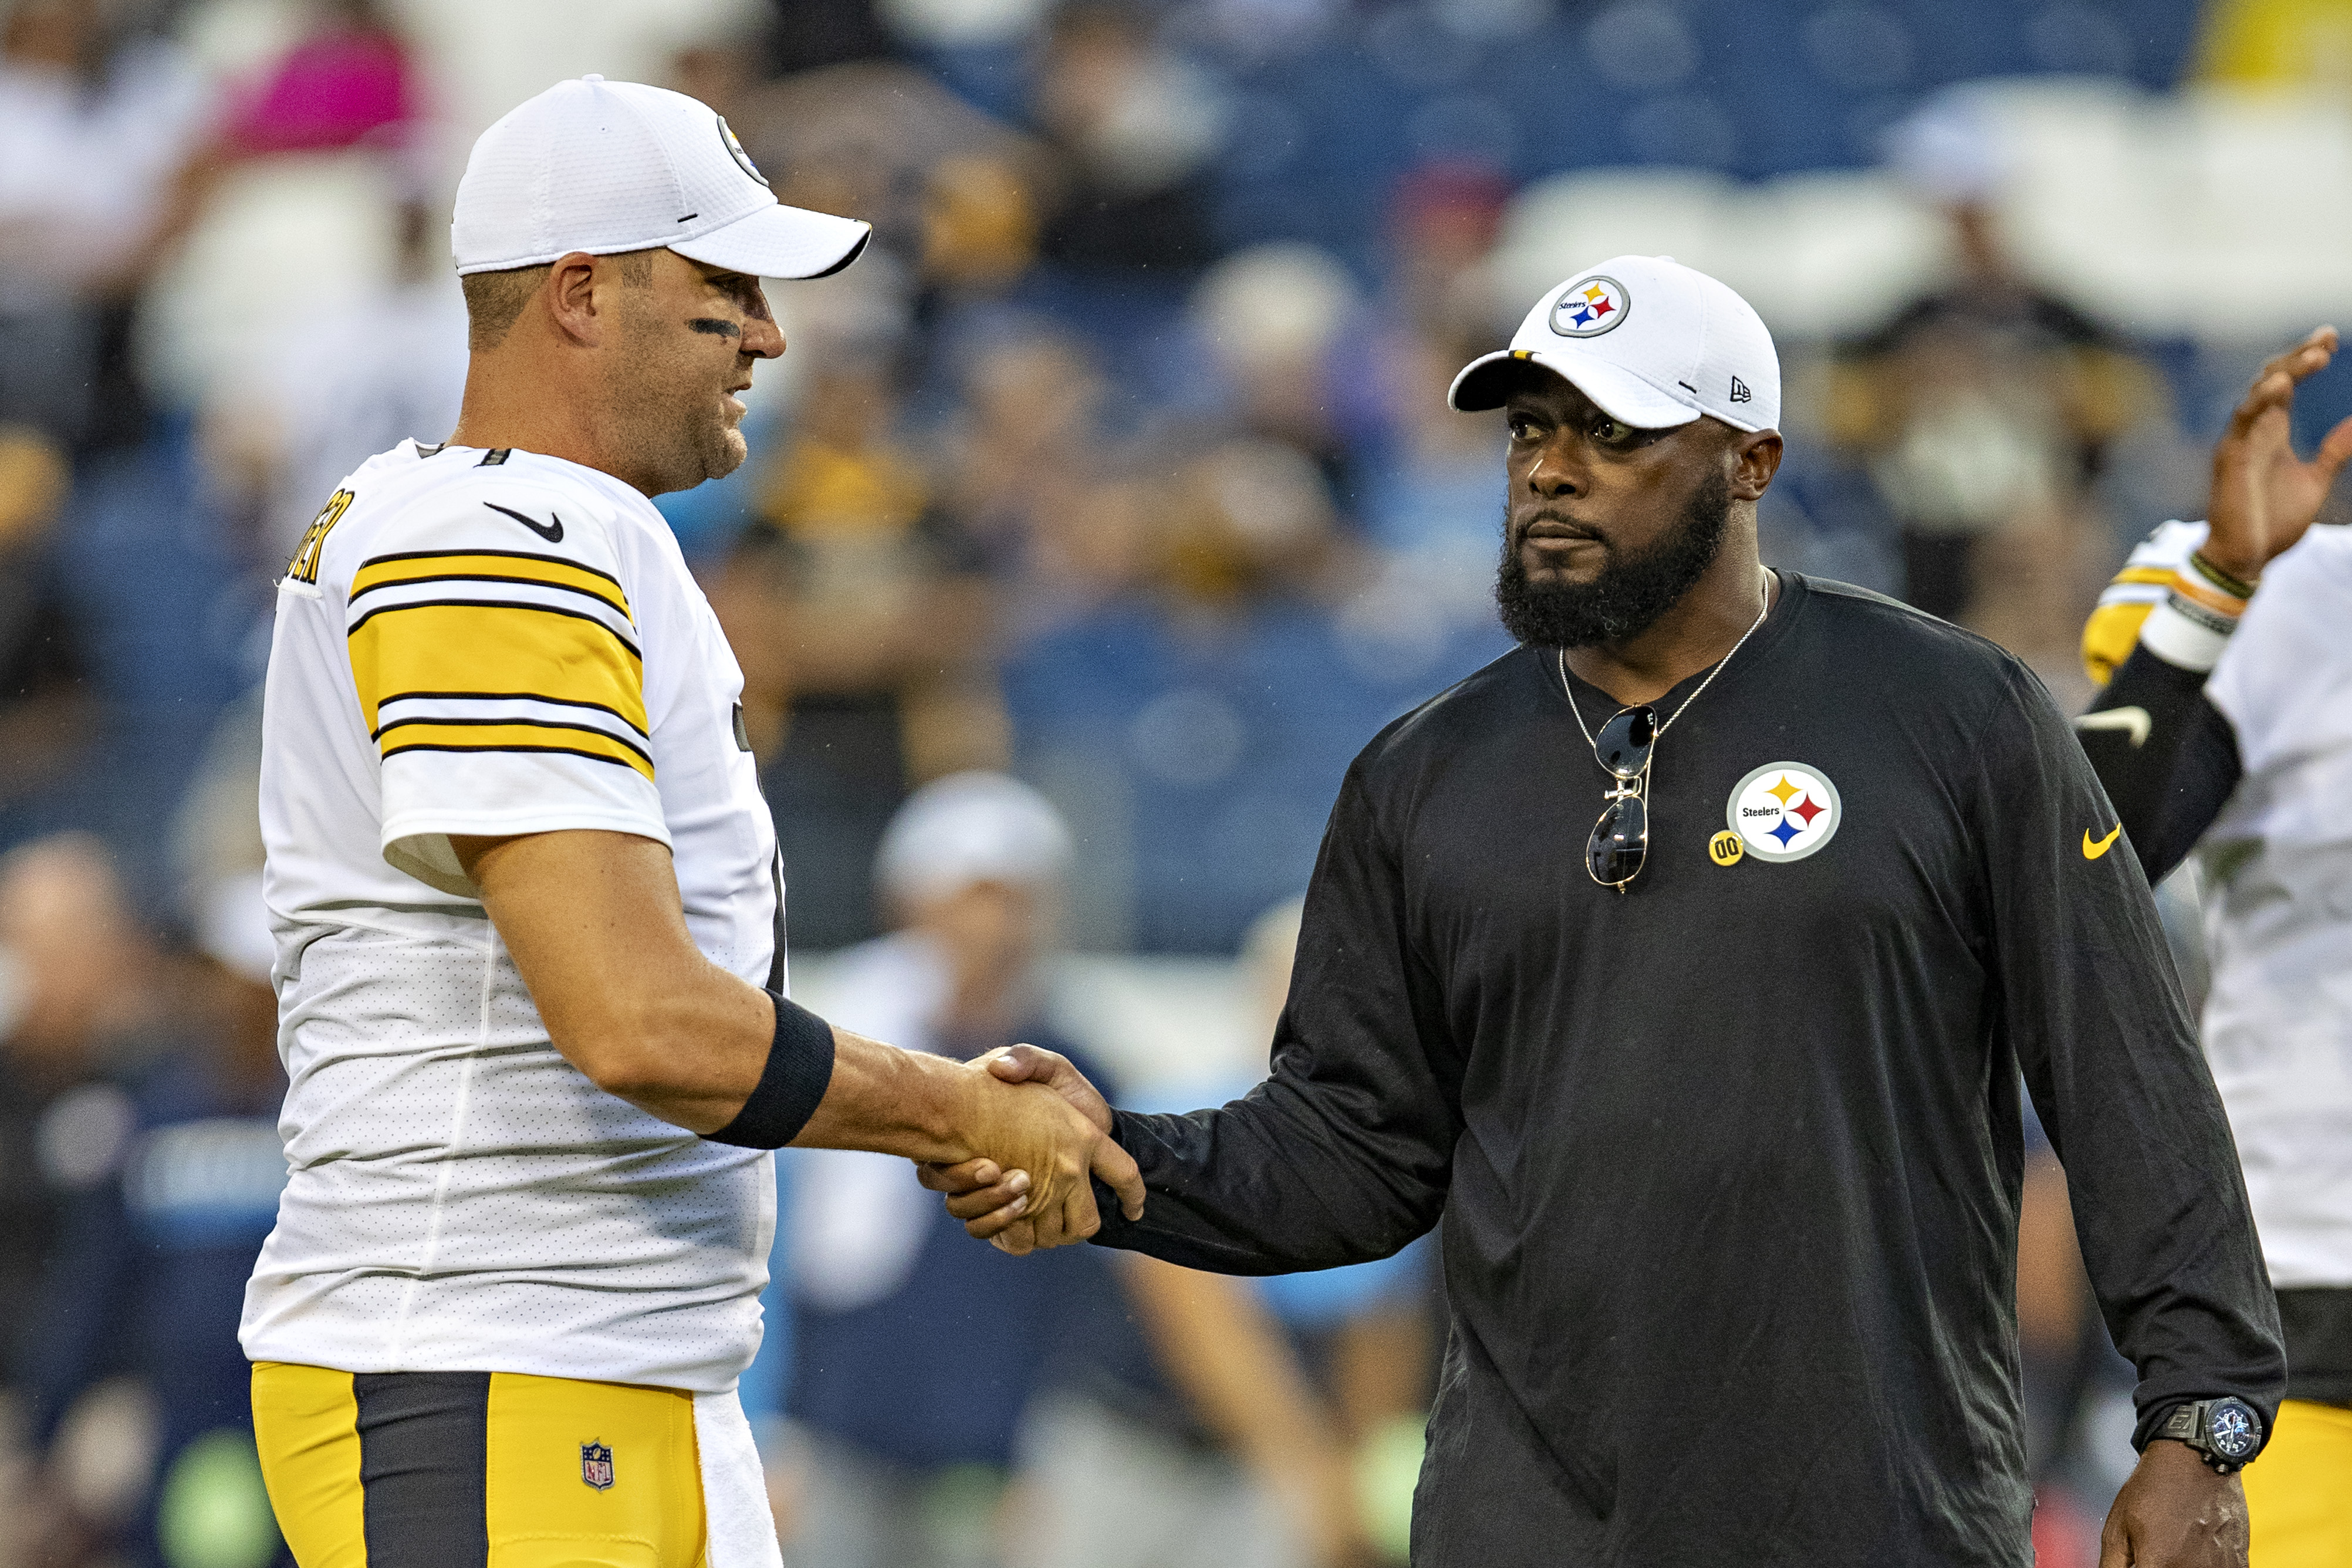 Steelers' Ben Roethlisberger: 'Not Really My Job' to Handle Chase Claypool's Beh..